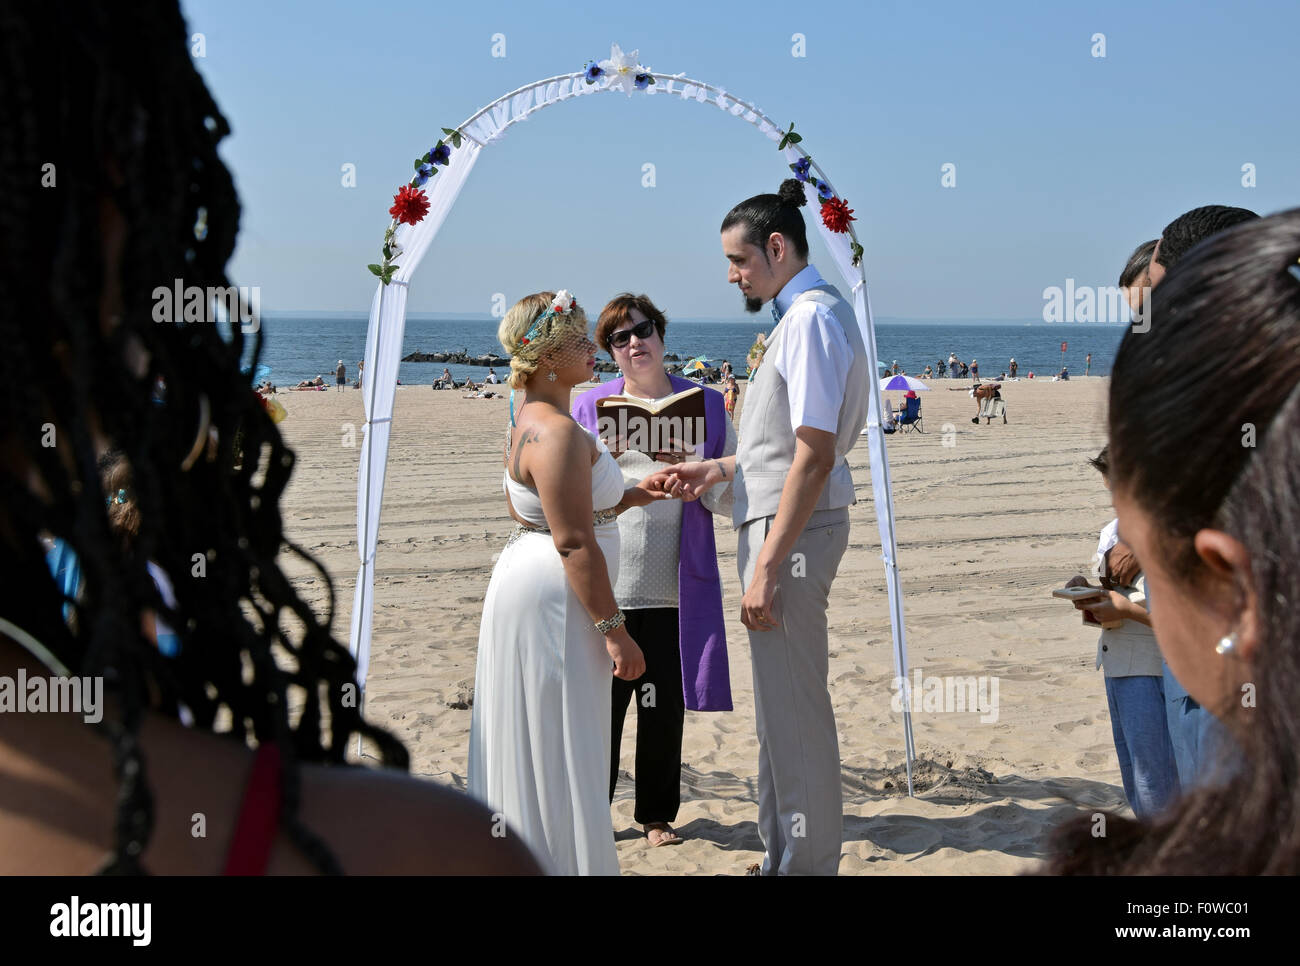 A couple getting married on the beach in Coney Island, Brooklyn, New York Stock Photo